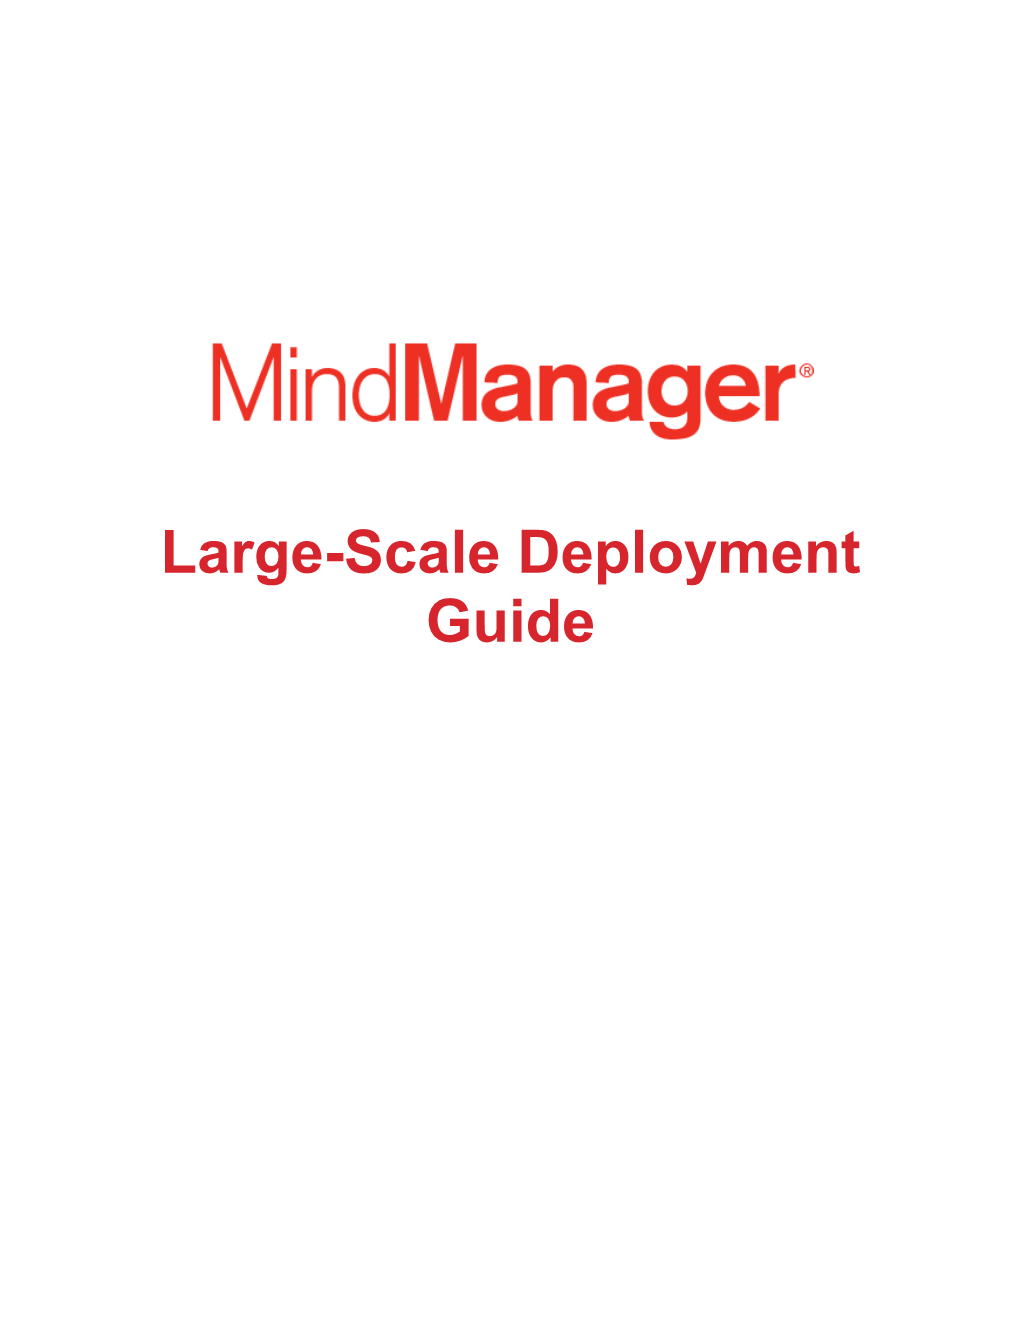 The Mindmanager Large Scale Deployment Guide, Version 15